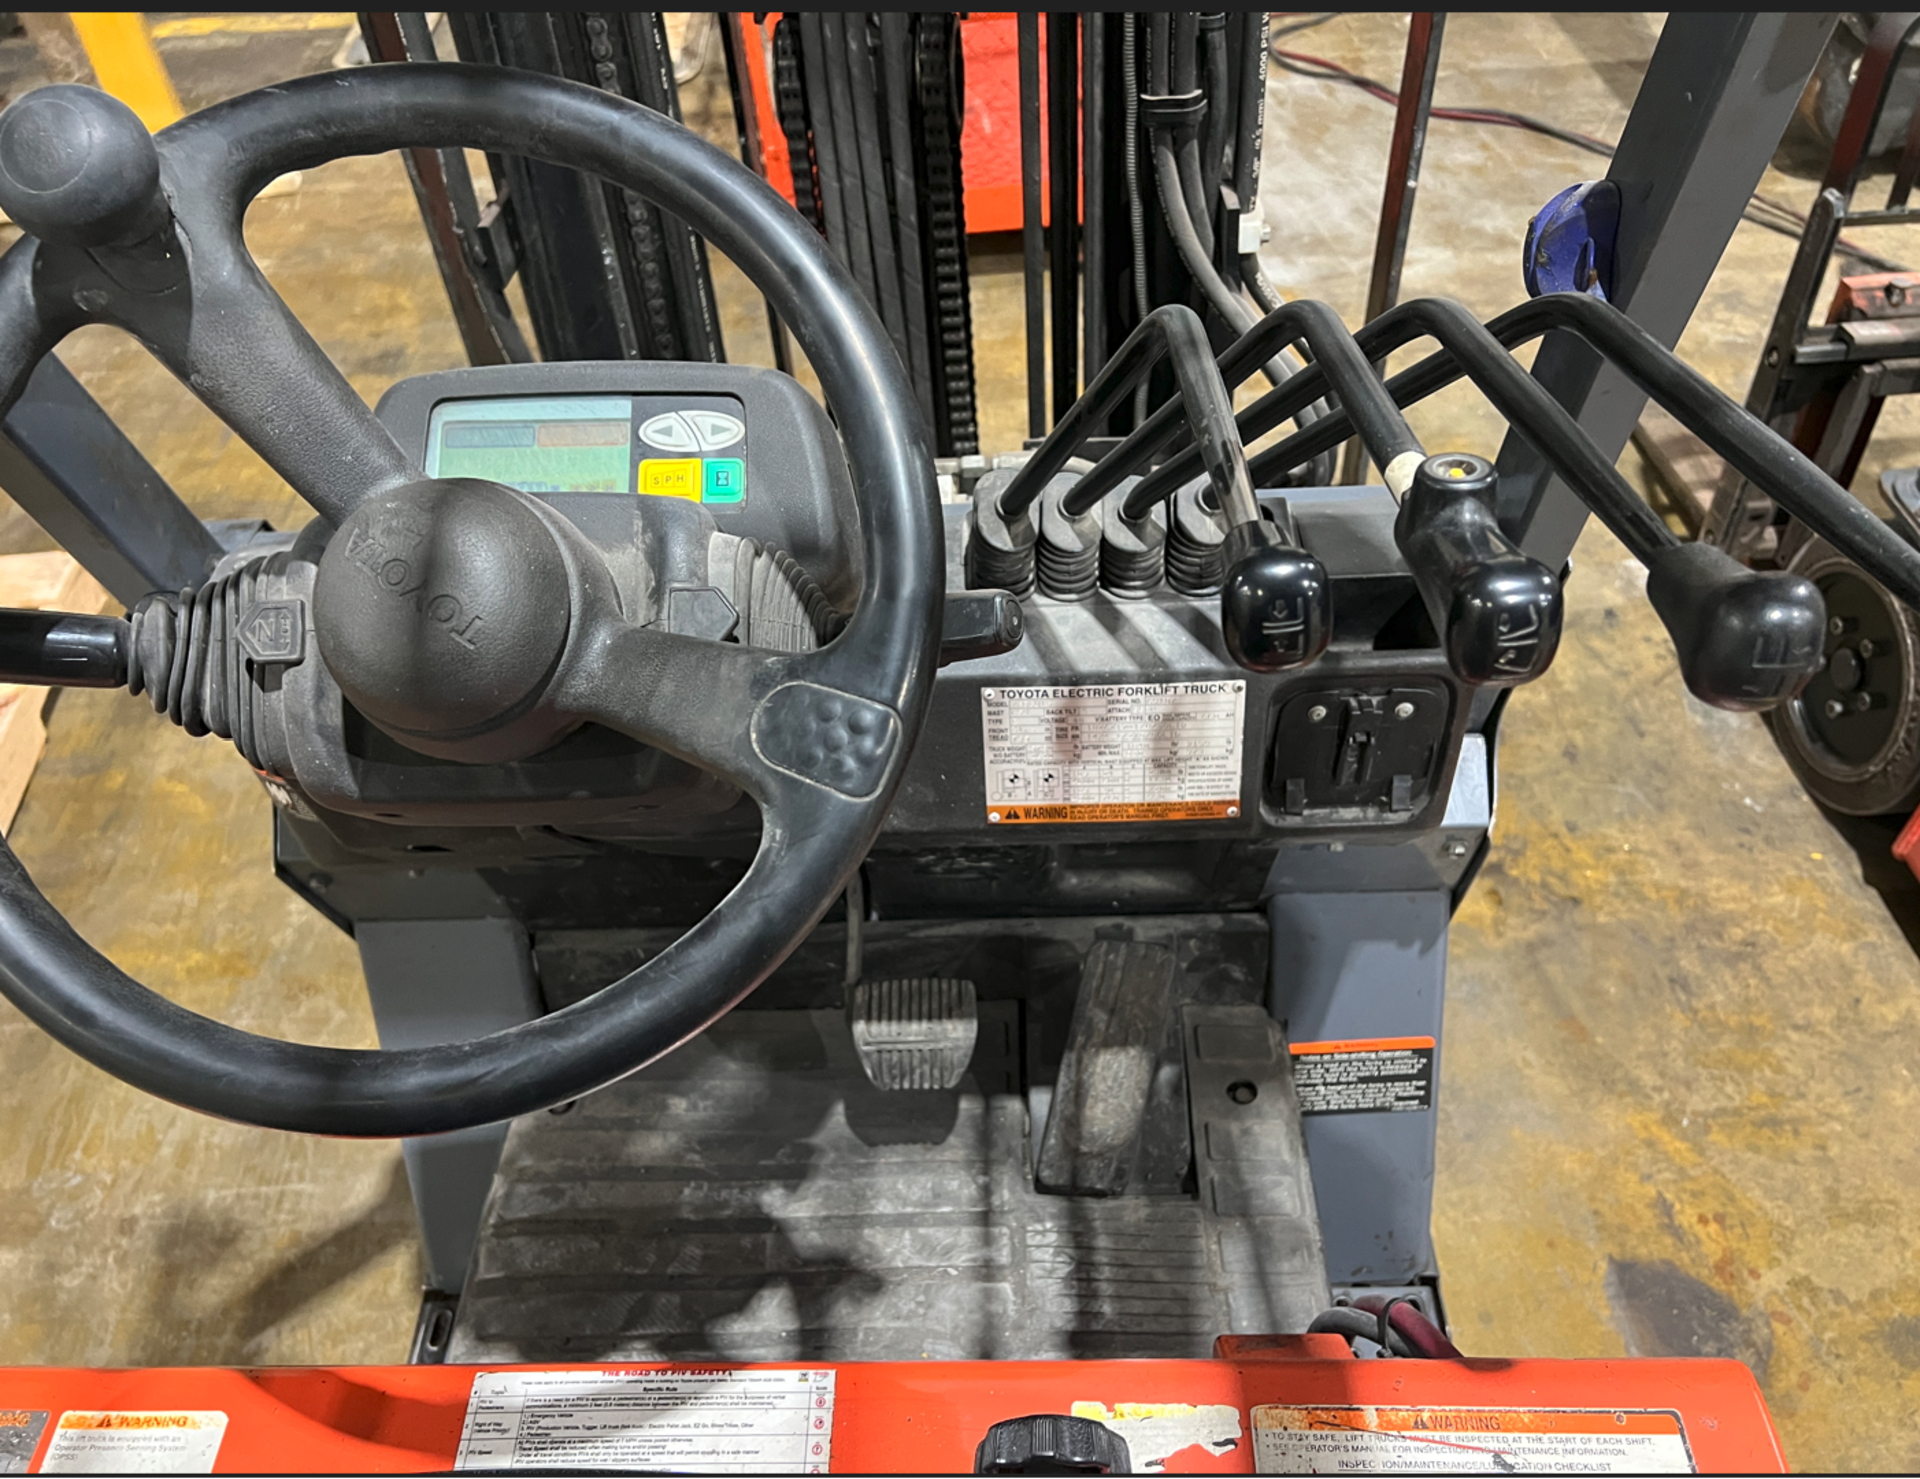 Toyota Electric Side Shift Forklift Truck with Adjustable Forks (Subject to Seller's Confirmation) - Image 7 of 13